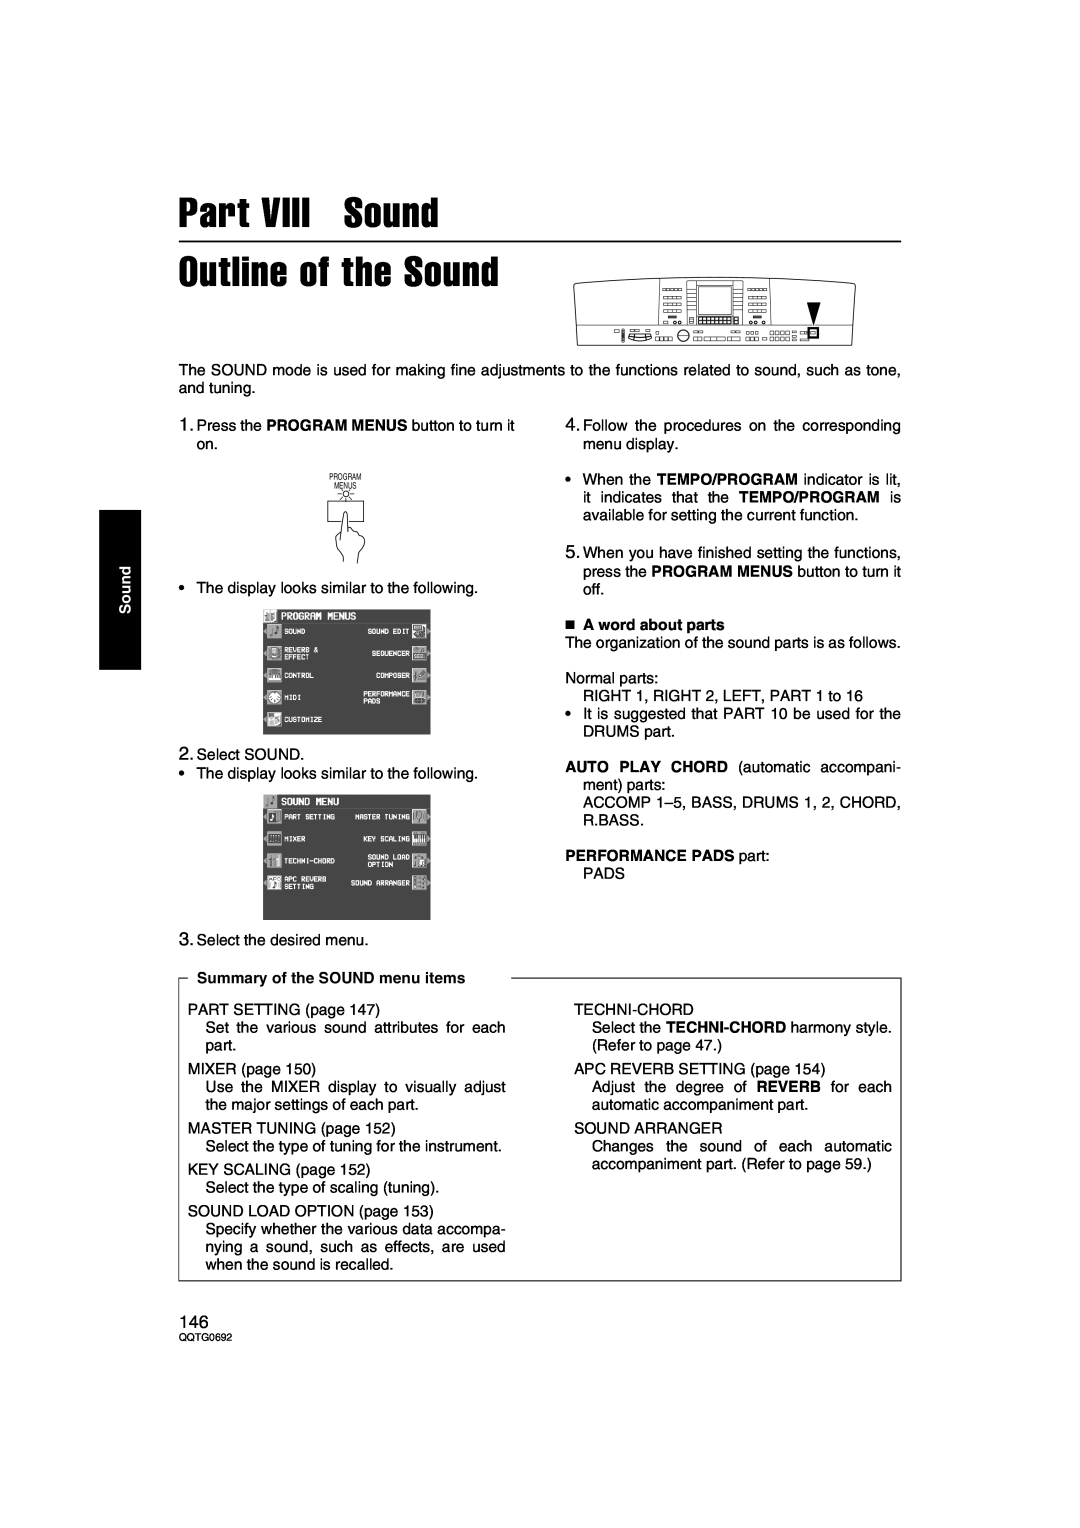 Panasonic SX-KN2600, SX-KN2400 Part VIII Sound Outline of the Sound, Summary of the SOUND menu items, A word about parts 